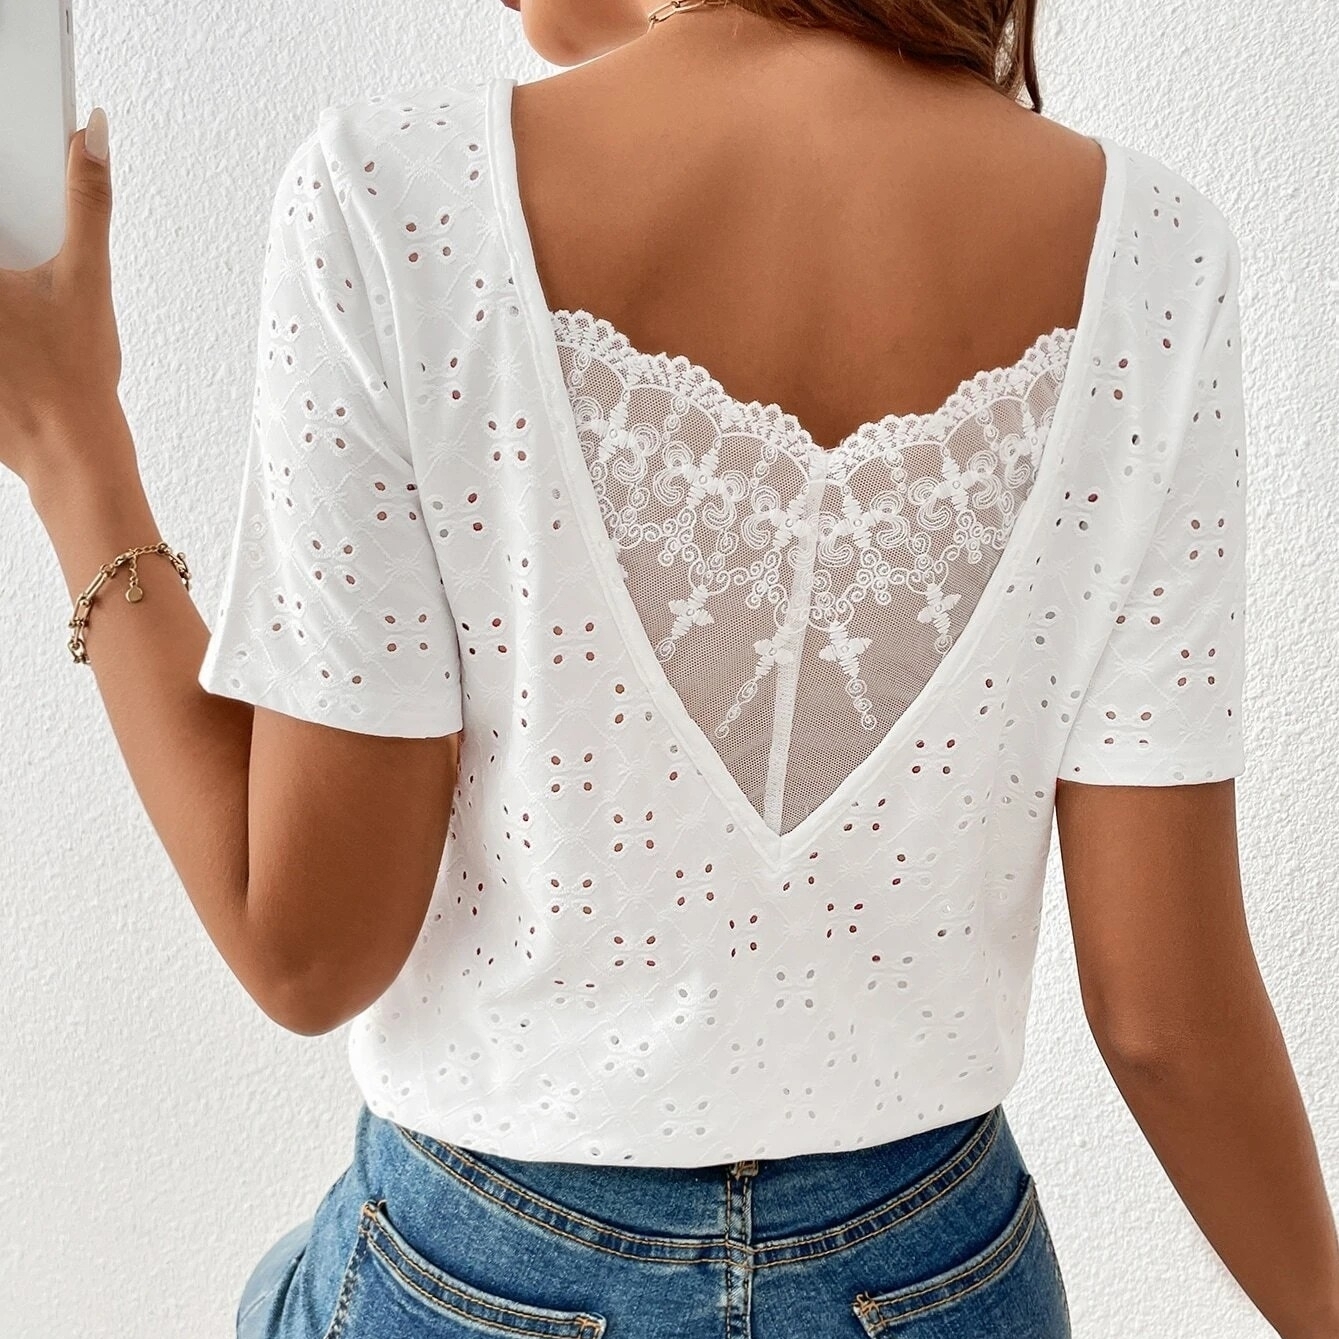 Contrast Lace Eyelet Embroidery Tee - S